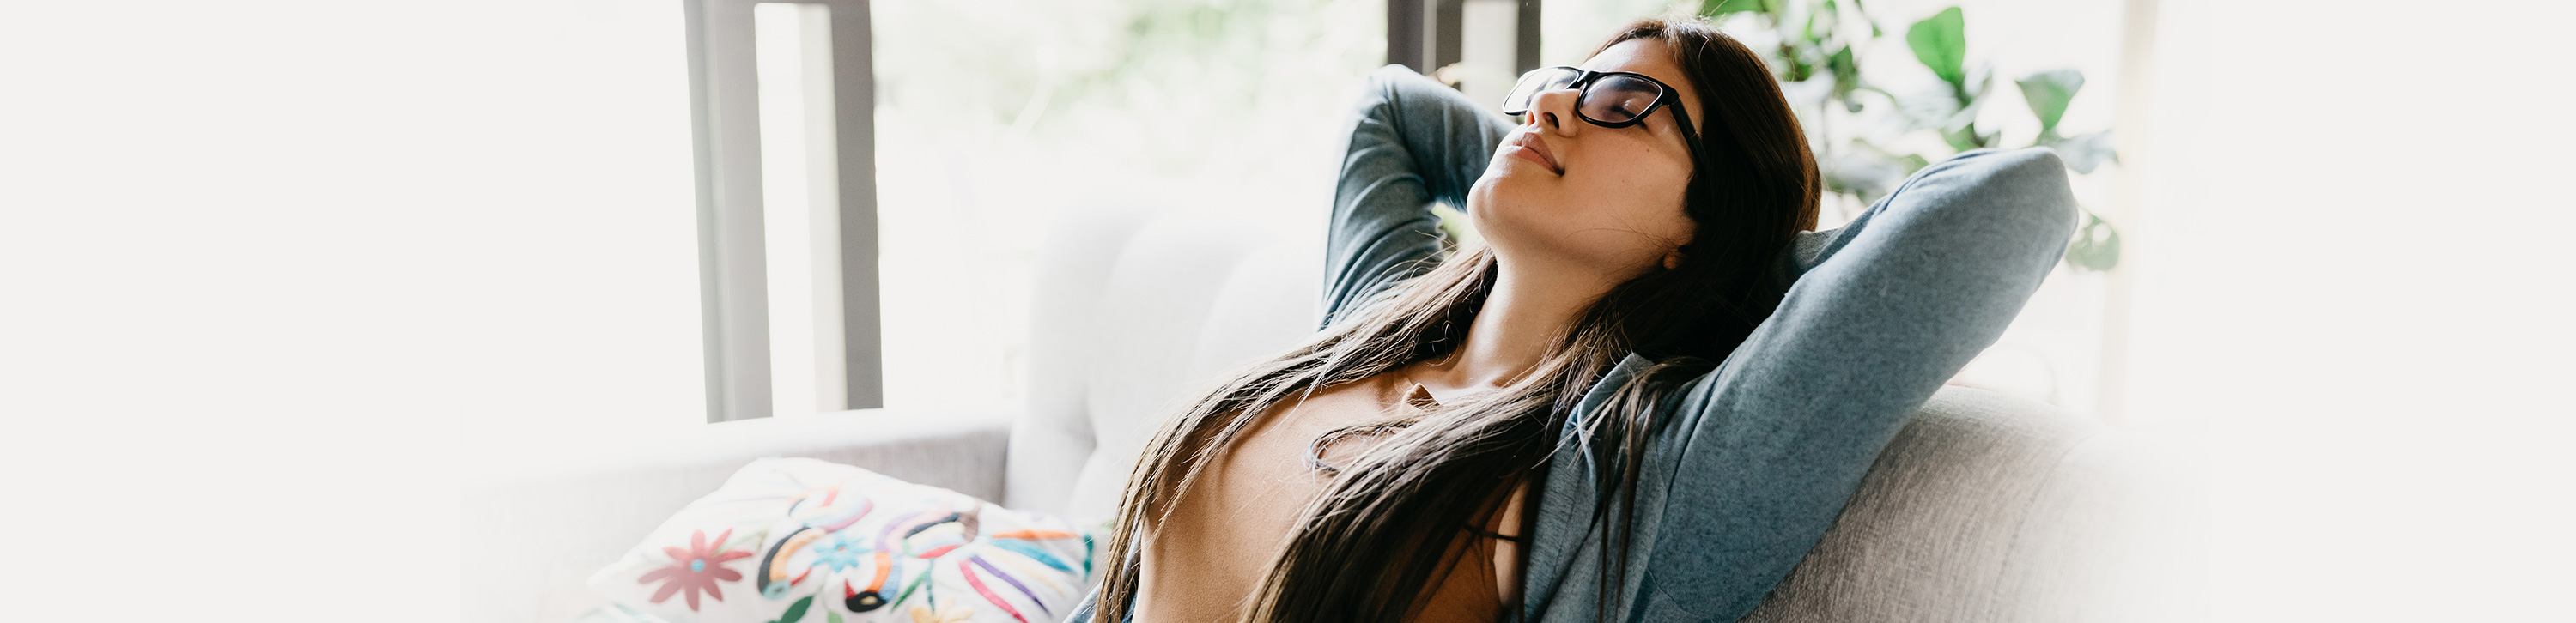 Woman relaxing with eyes closed